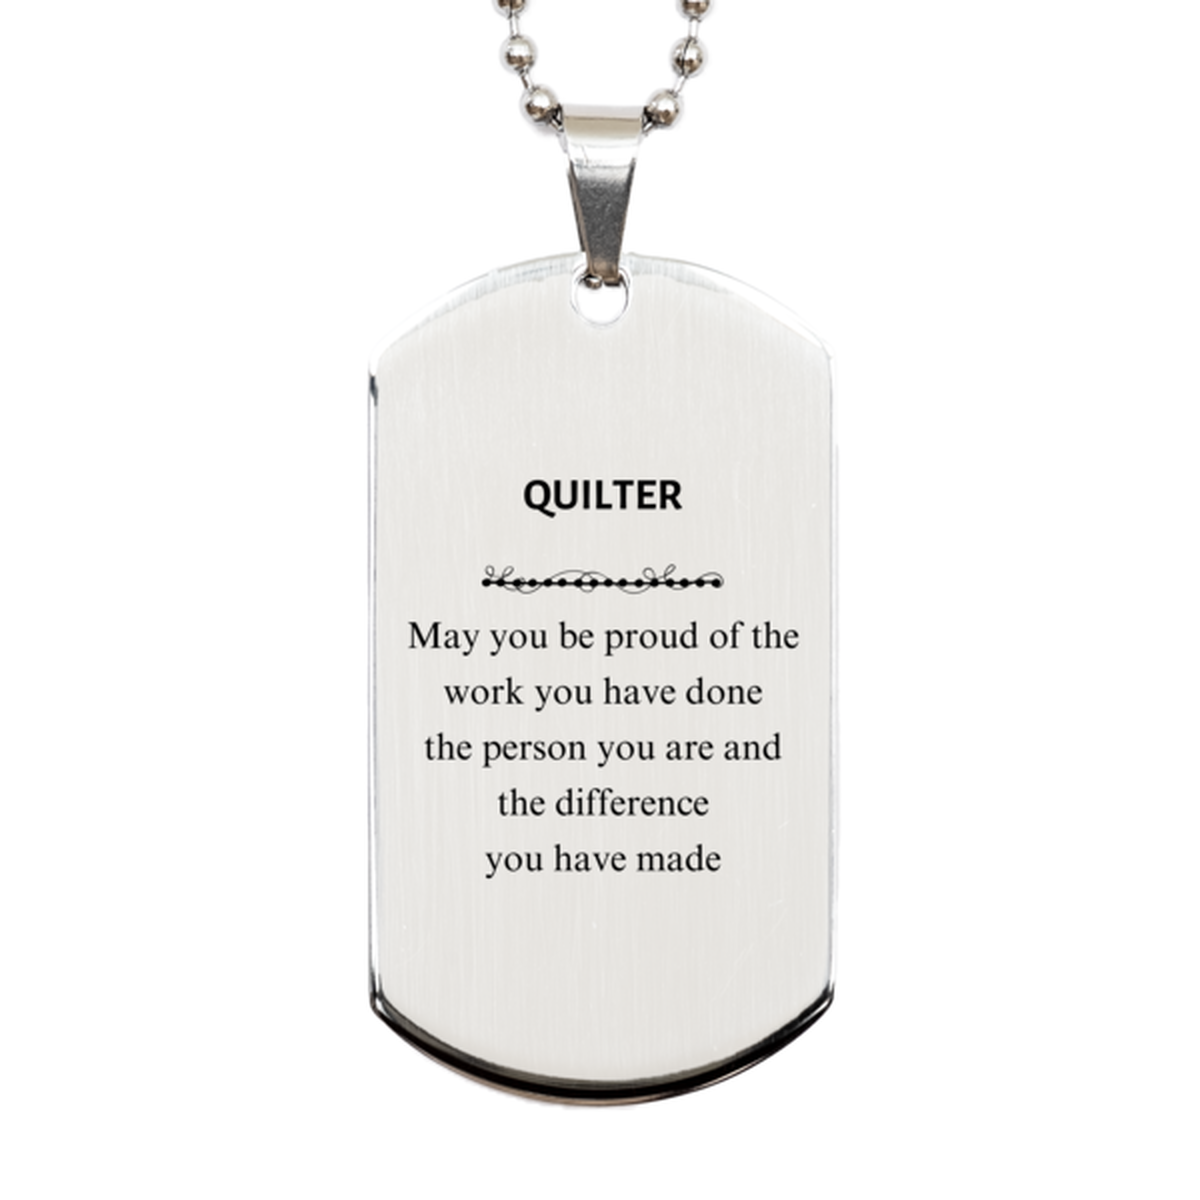 Quilter May you be proud of the work you have done, Retirement Quilter Silver Dog Tag for Colleague Appreciation Gifts Amazing for Quilter